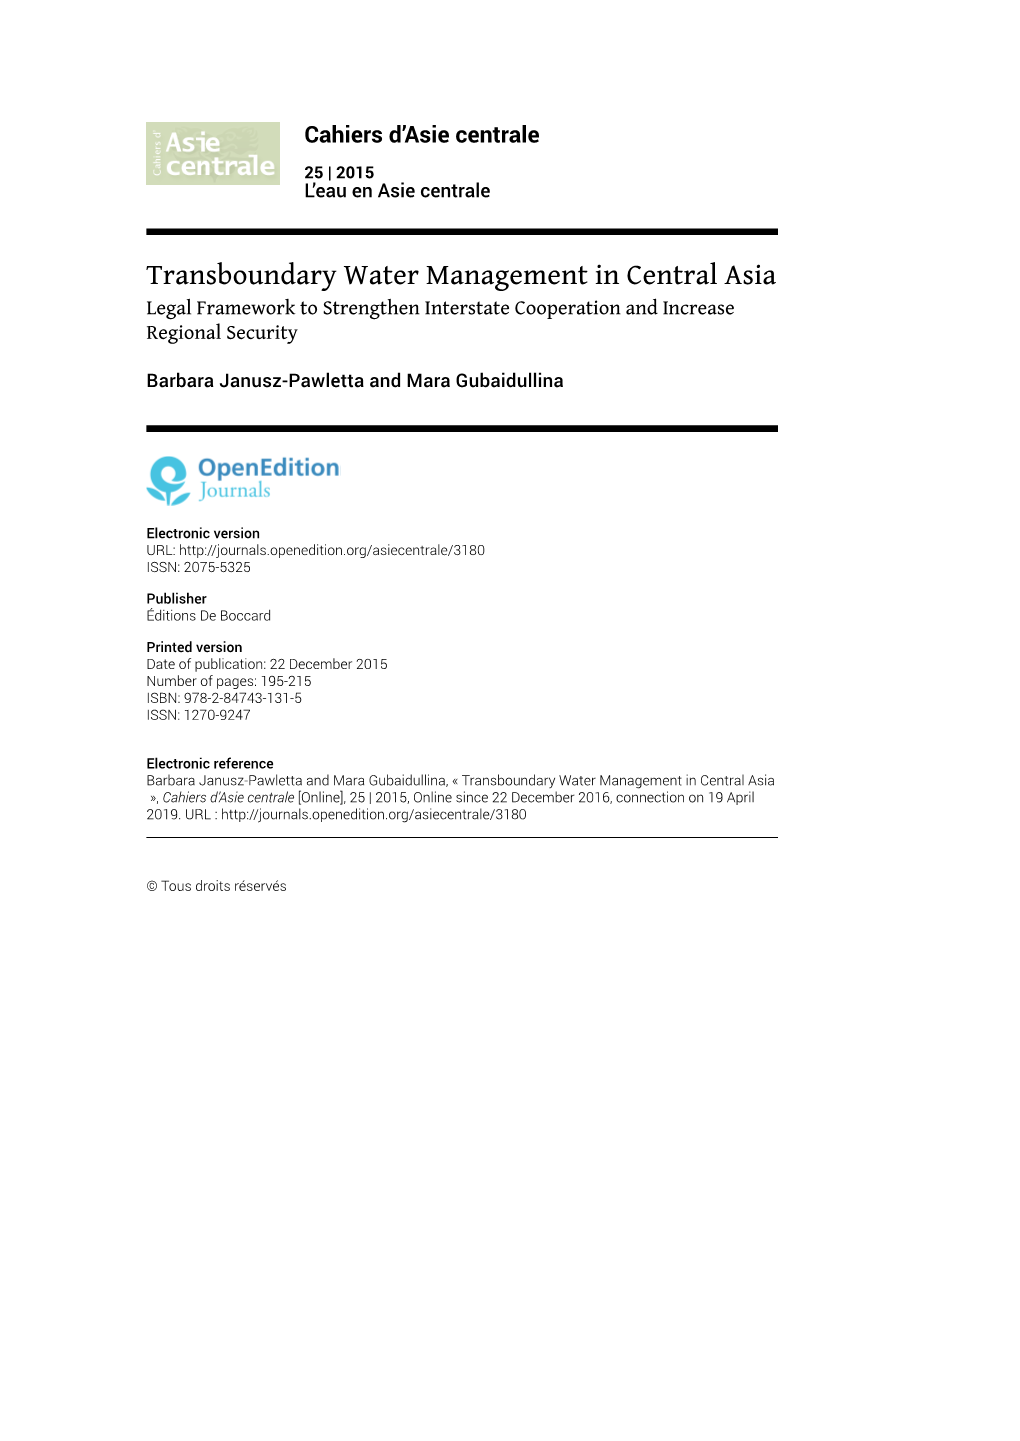 Transboundary Water Management in Central Asia Legal Framework to Strengthen Interstate Cooperation and Increase Regional Security